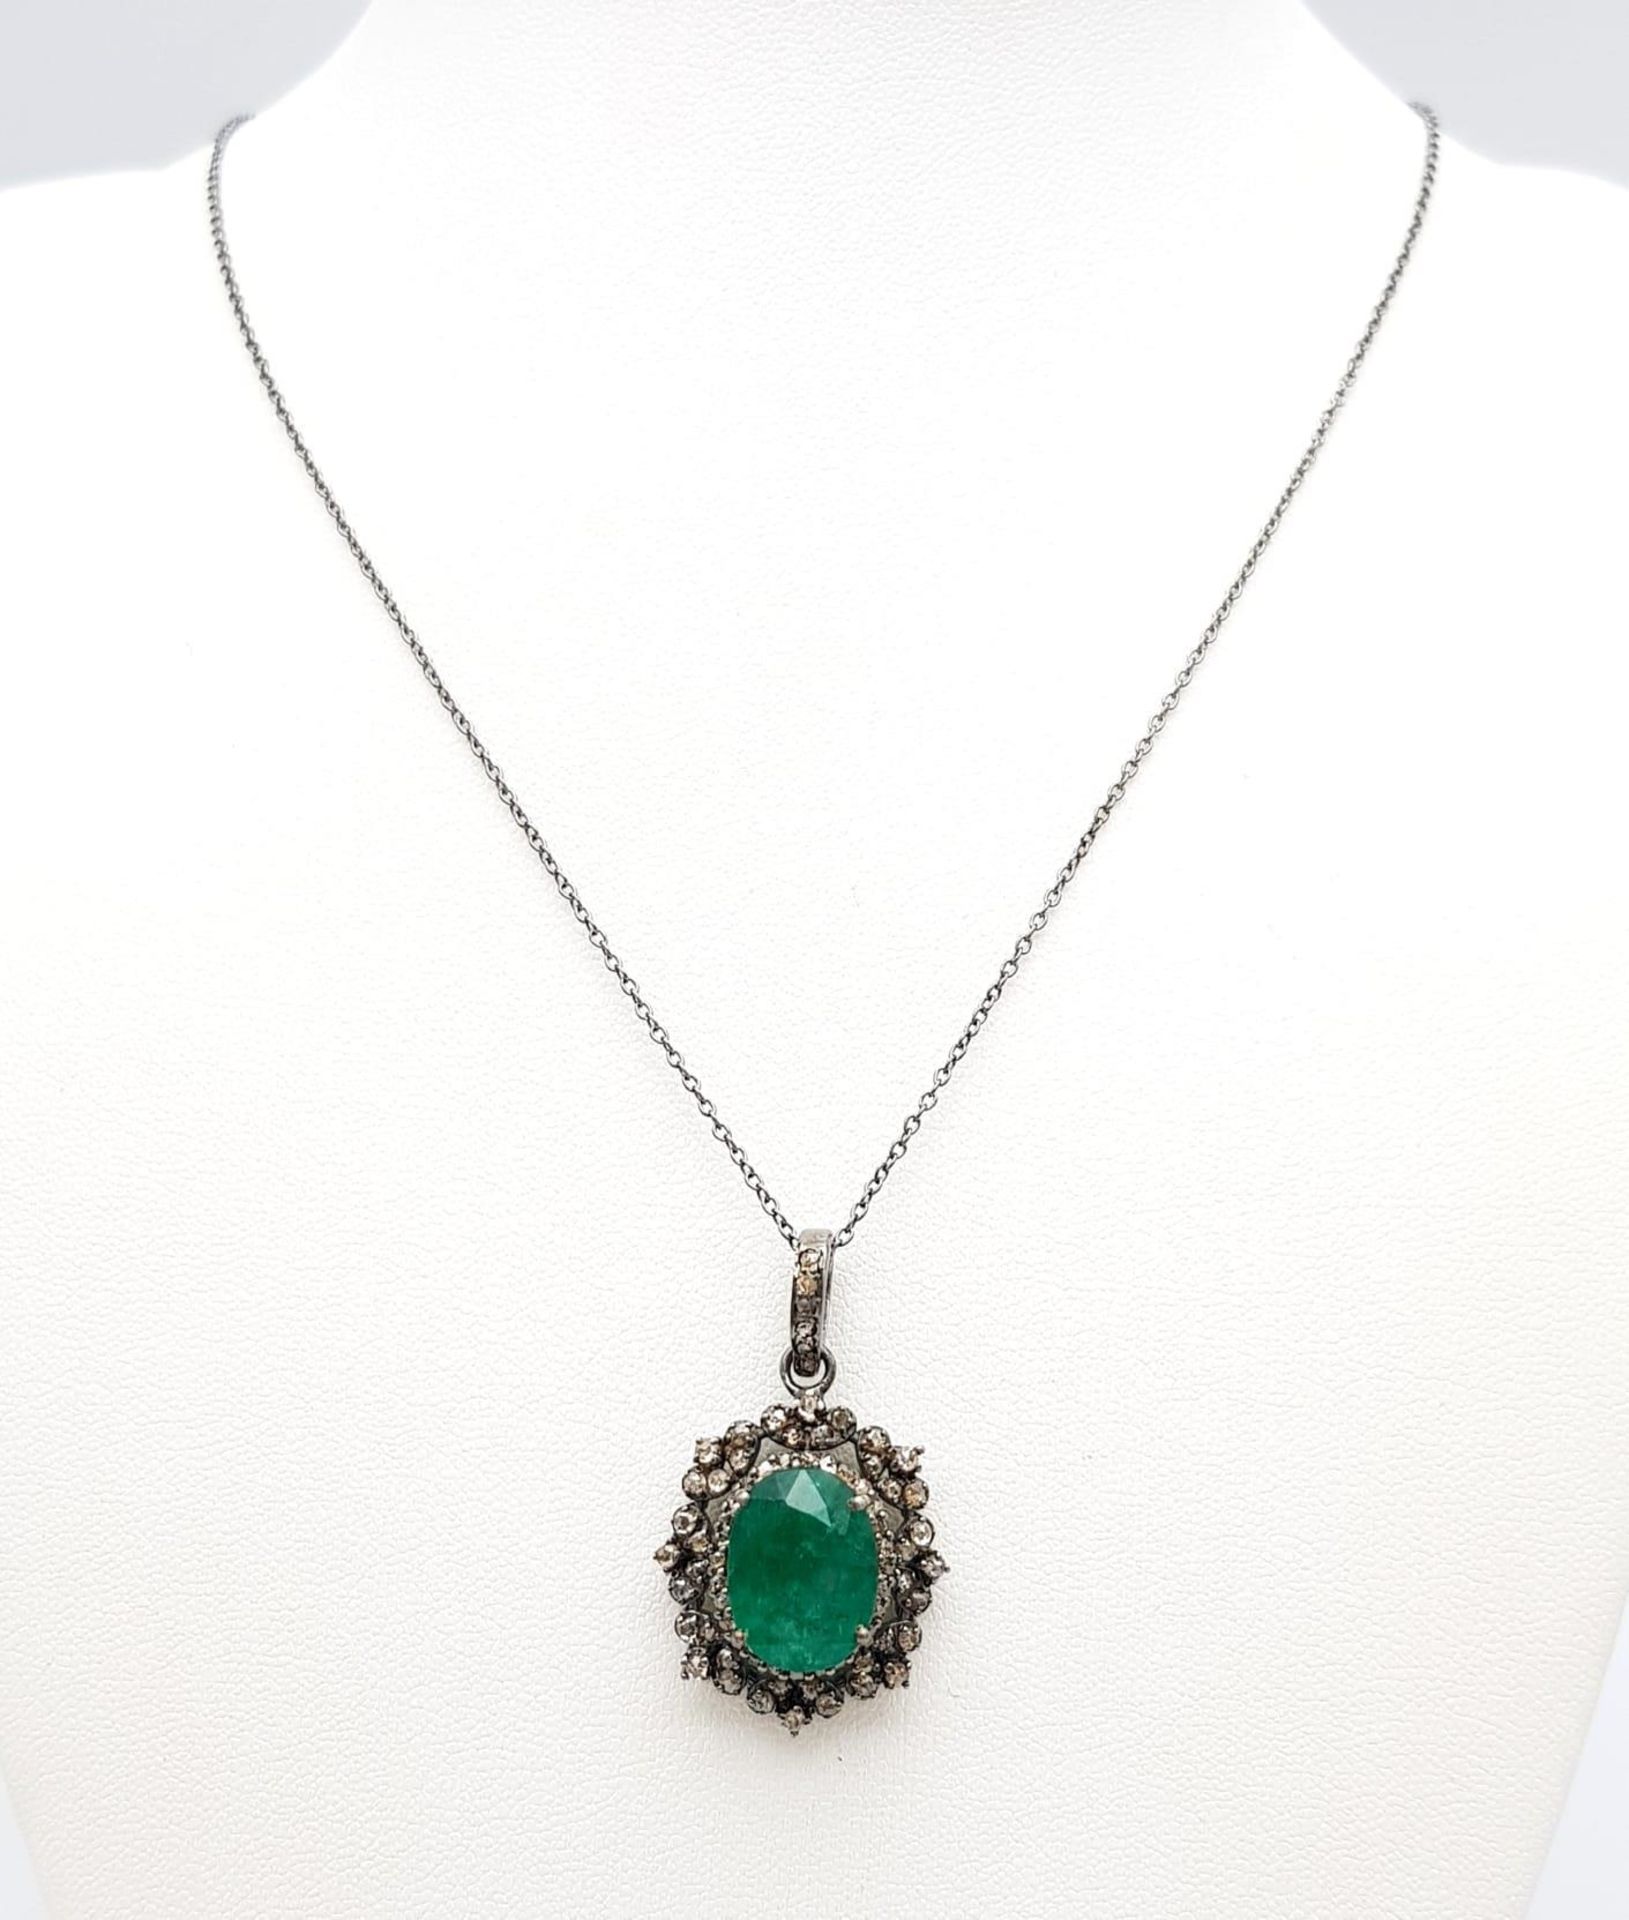 An Emerald Pendant with Diamond Surround on 925 Silver and Silver Chain. 6.90ct emerald, 1.25ctw - Image 2 of 9